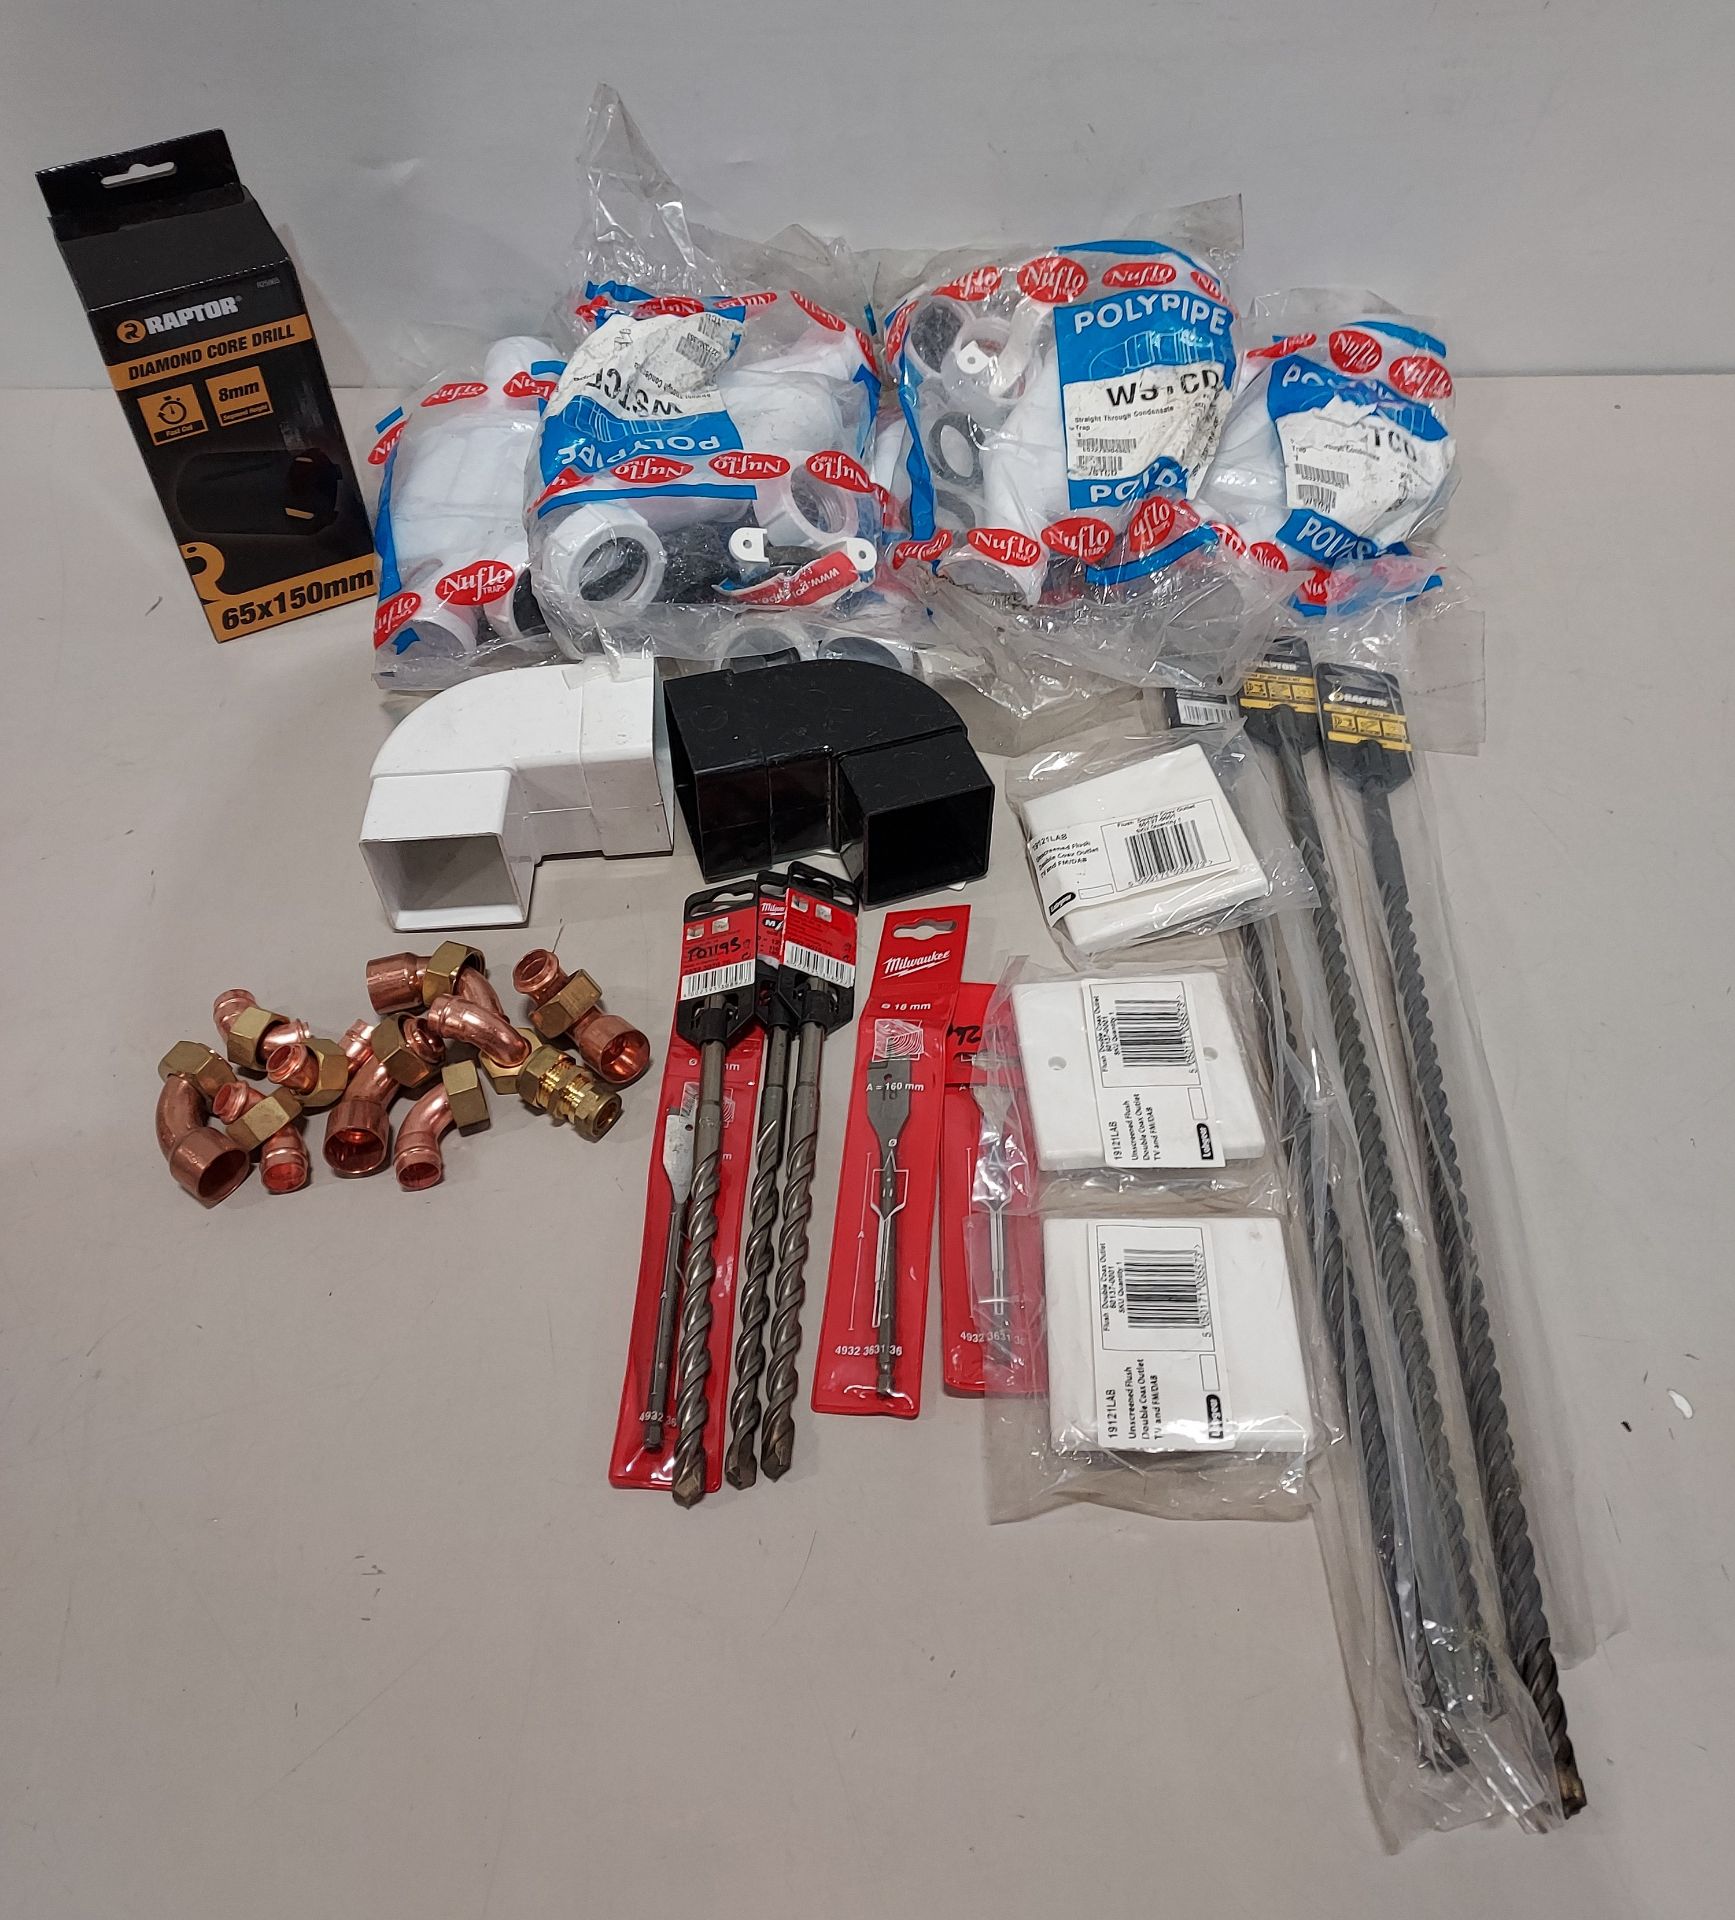 30 X BRAND NEW TOOLS AND PLUMBING LOT CONTAINING 65 MM DIAMOND CORE DRILL BIT / WLWAUEKEE SDS + FLAT